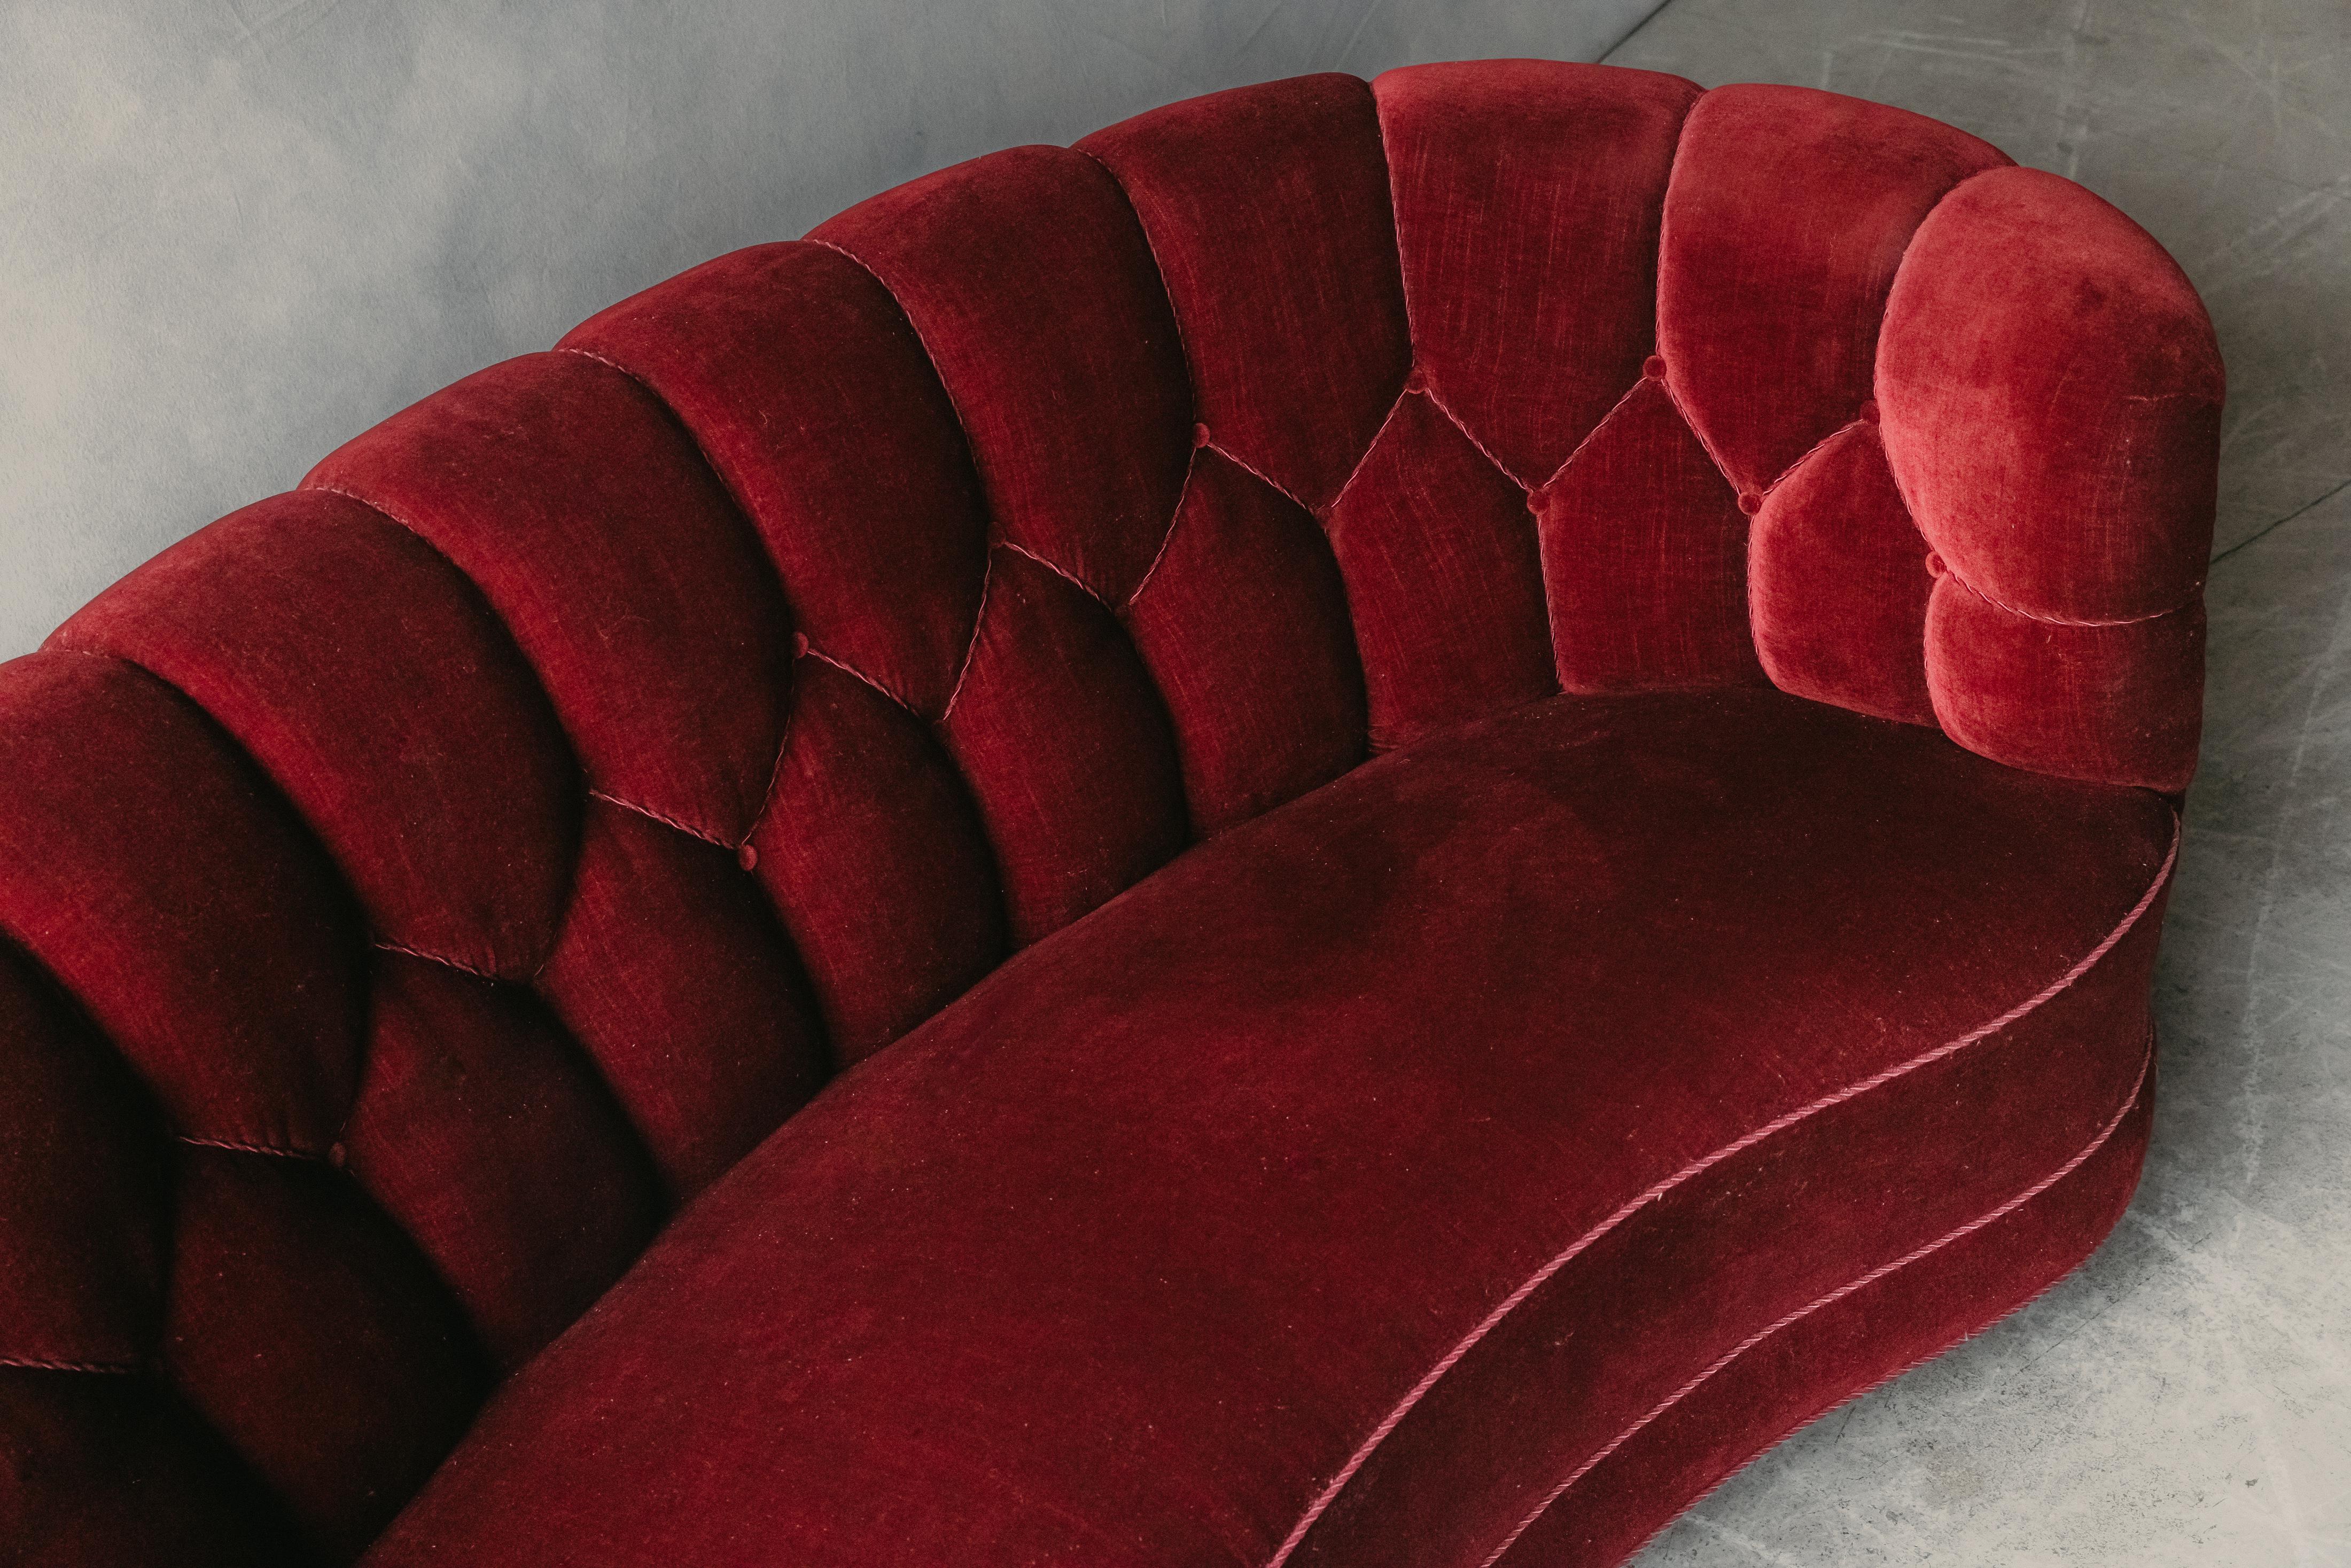 Vintage Red Velvet Sofa From Denmark, Circa 1950.  Original upholstery with very light use and wear.